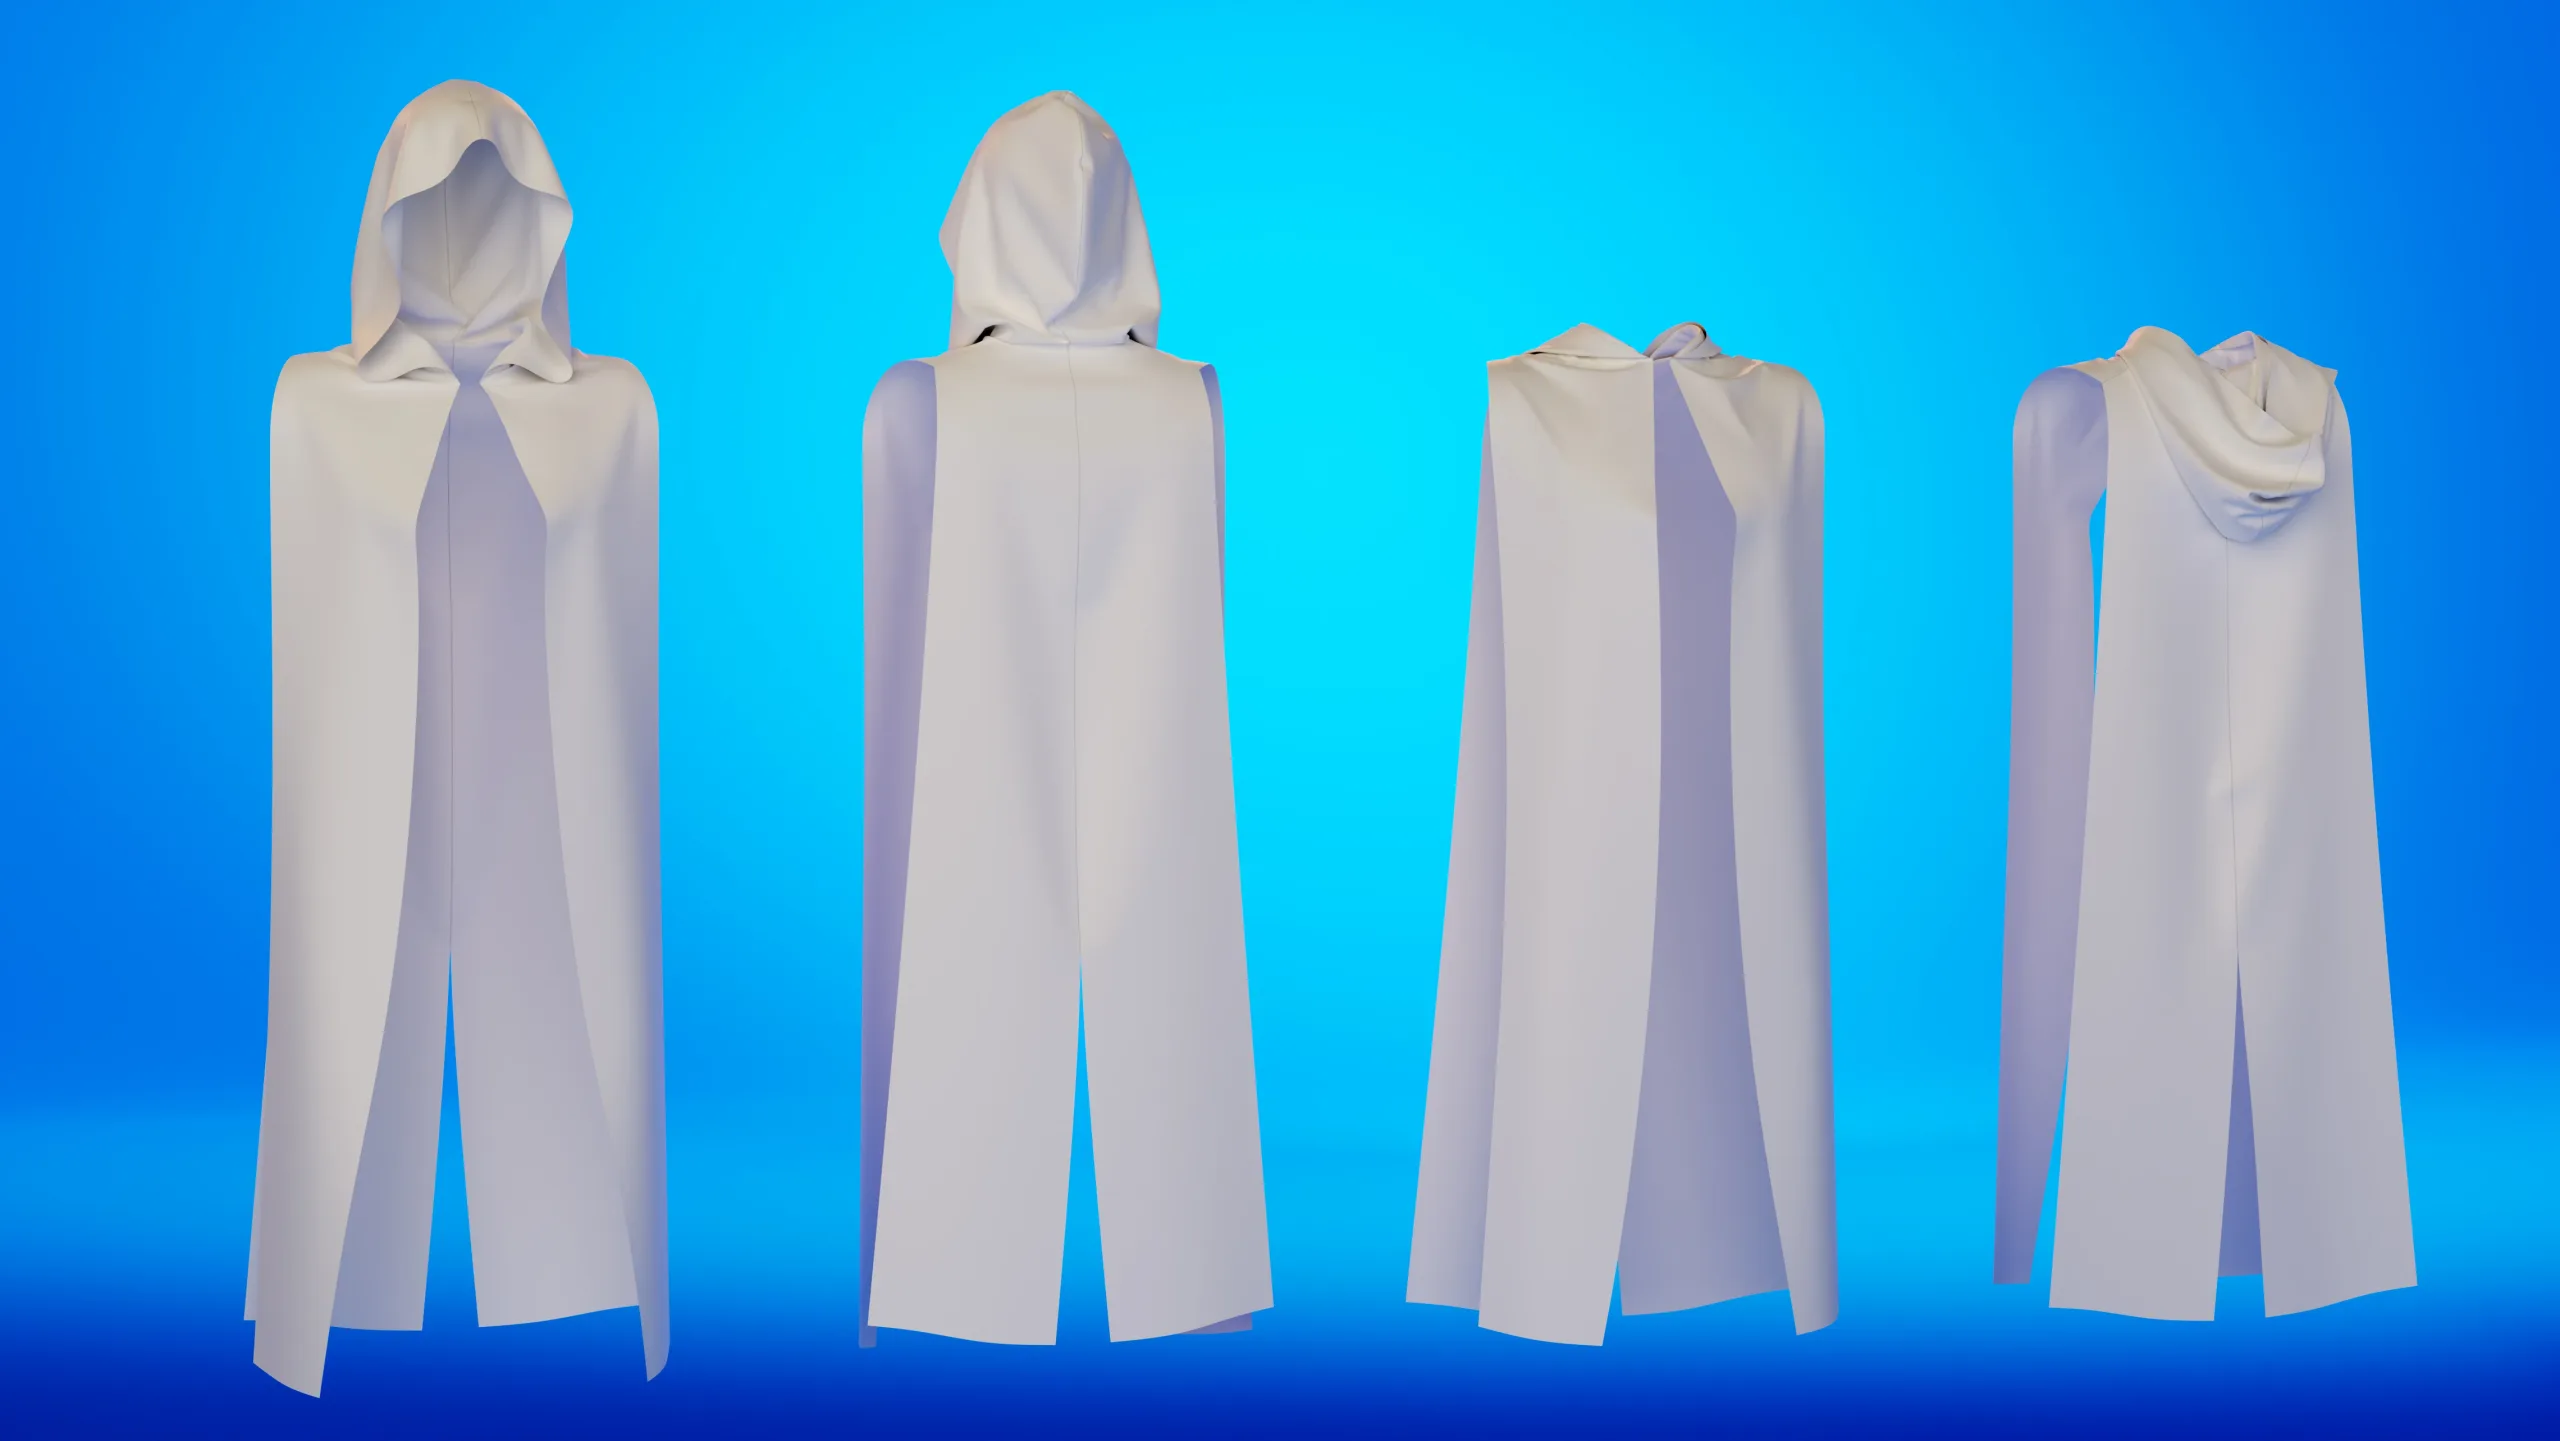 10 + 8 Capes Basemesh Models + Reference Images for texturing + Bonus + Project Files